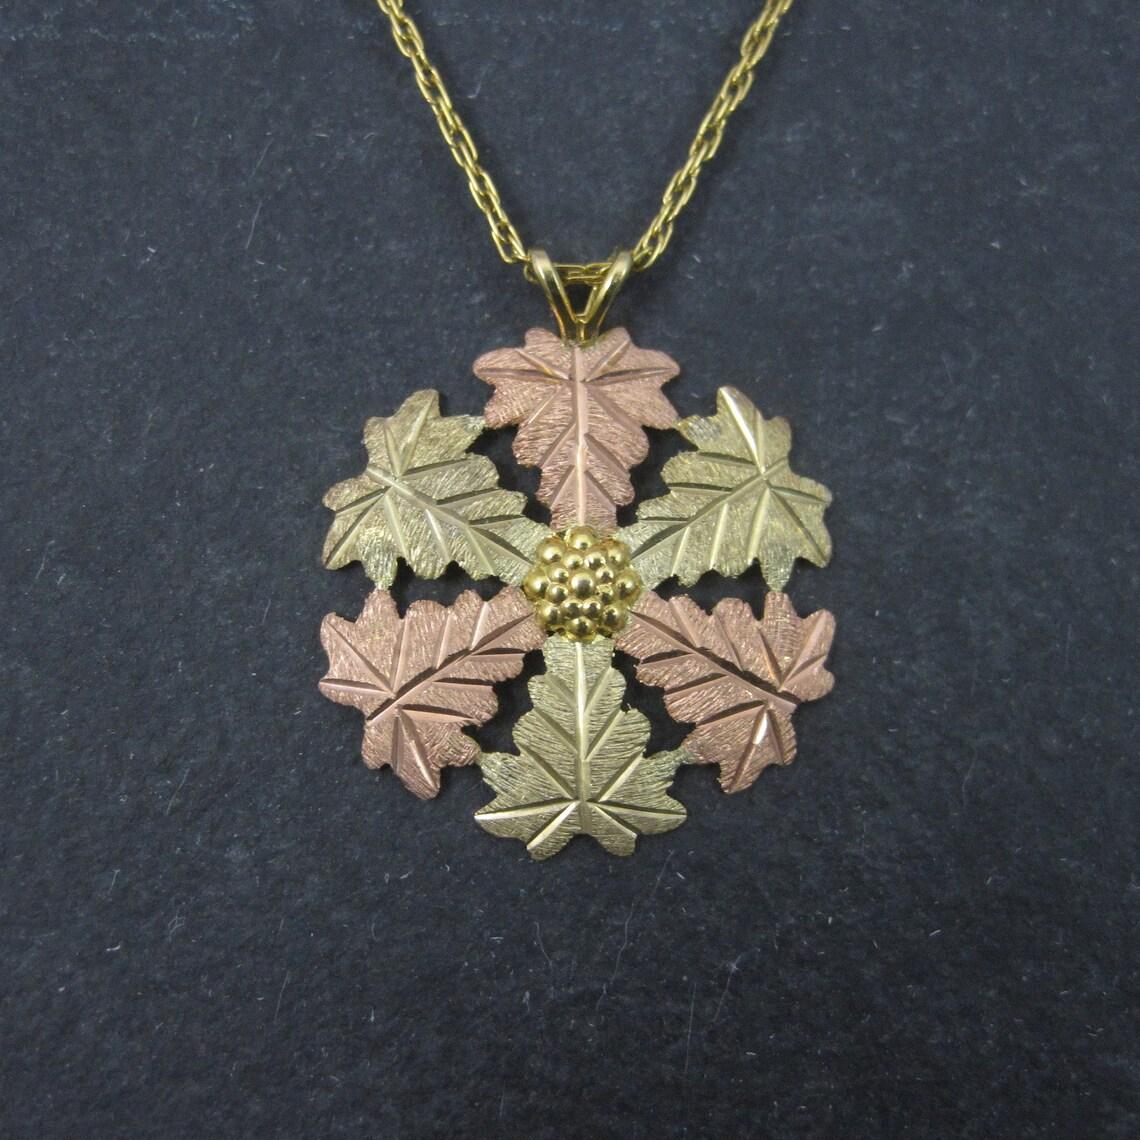 This gorgeous, vintage Black Hills Gold pendant is 10k yellow, pink and green gold.
It is a product of Landstroms.

Measurements: 7/8 by 1 inch
Comes on a 14k gold filled, 18 inch chain

Condition: Excellent - like new